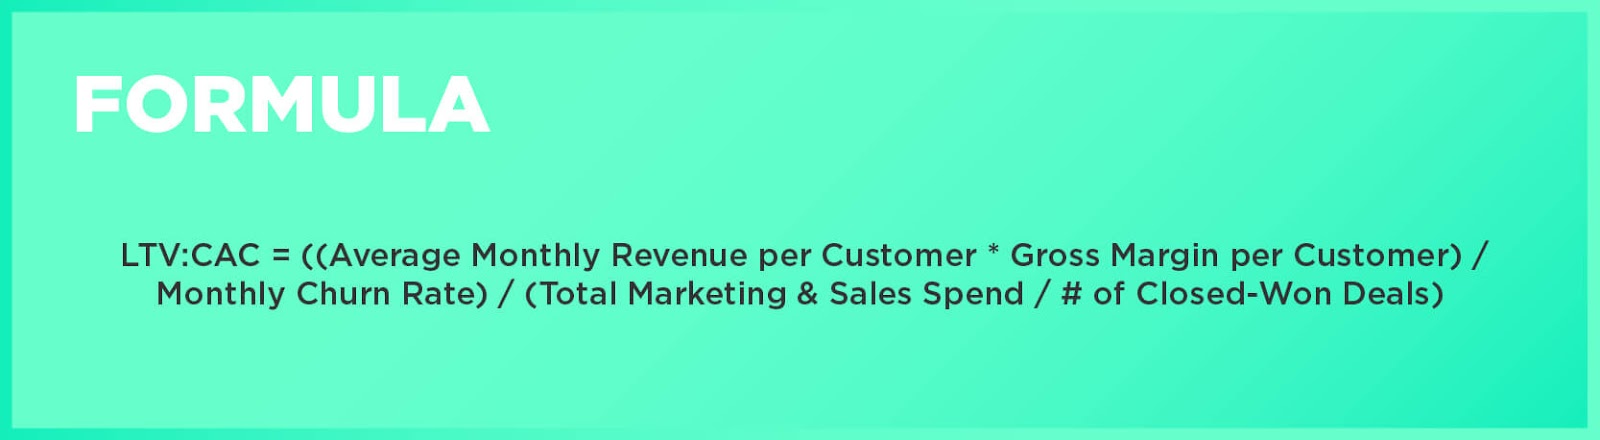 Formula: LTV:CAC = ((Average Monthly Revenue per Customer * Gross Margin per Customer) / Monthly Churn Rate) / (Total Marketing & Sales Spend / # of Closed-Won Deals)